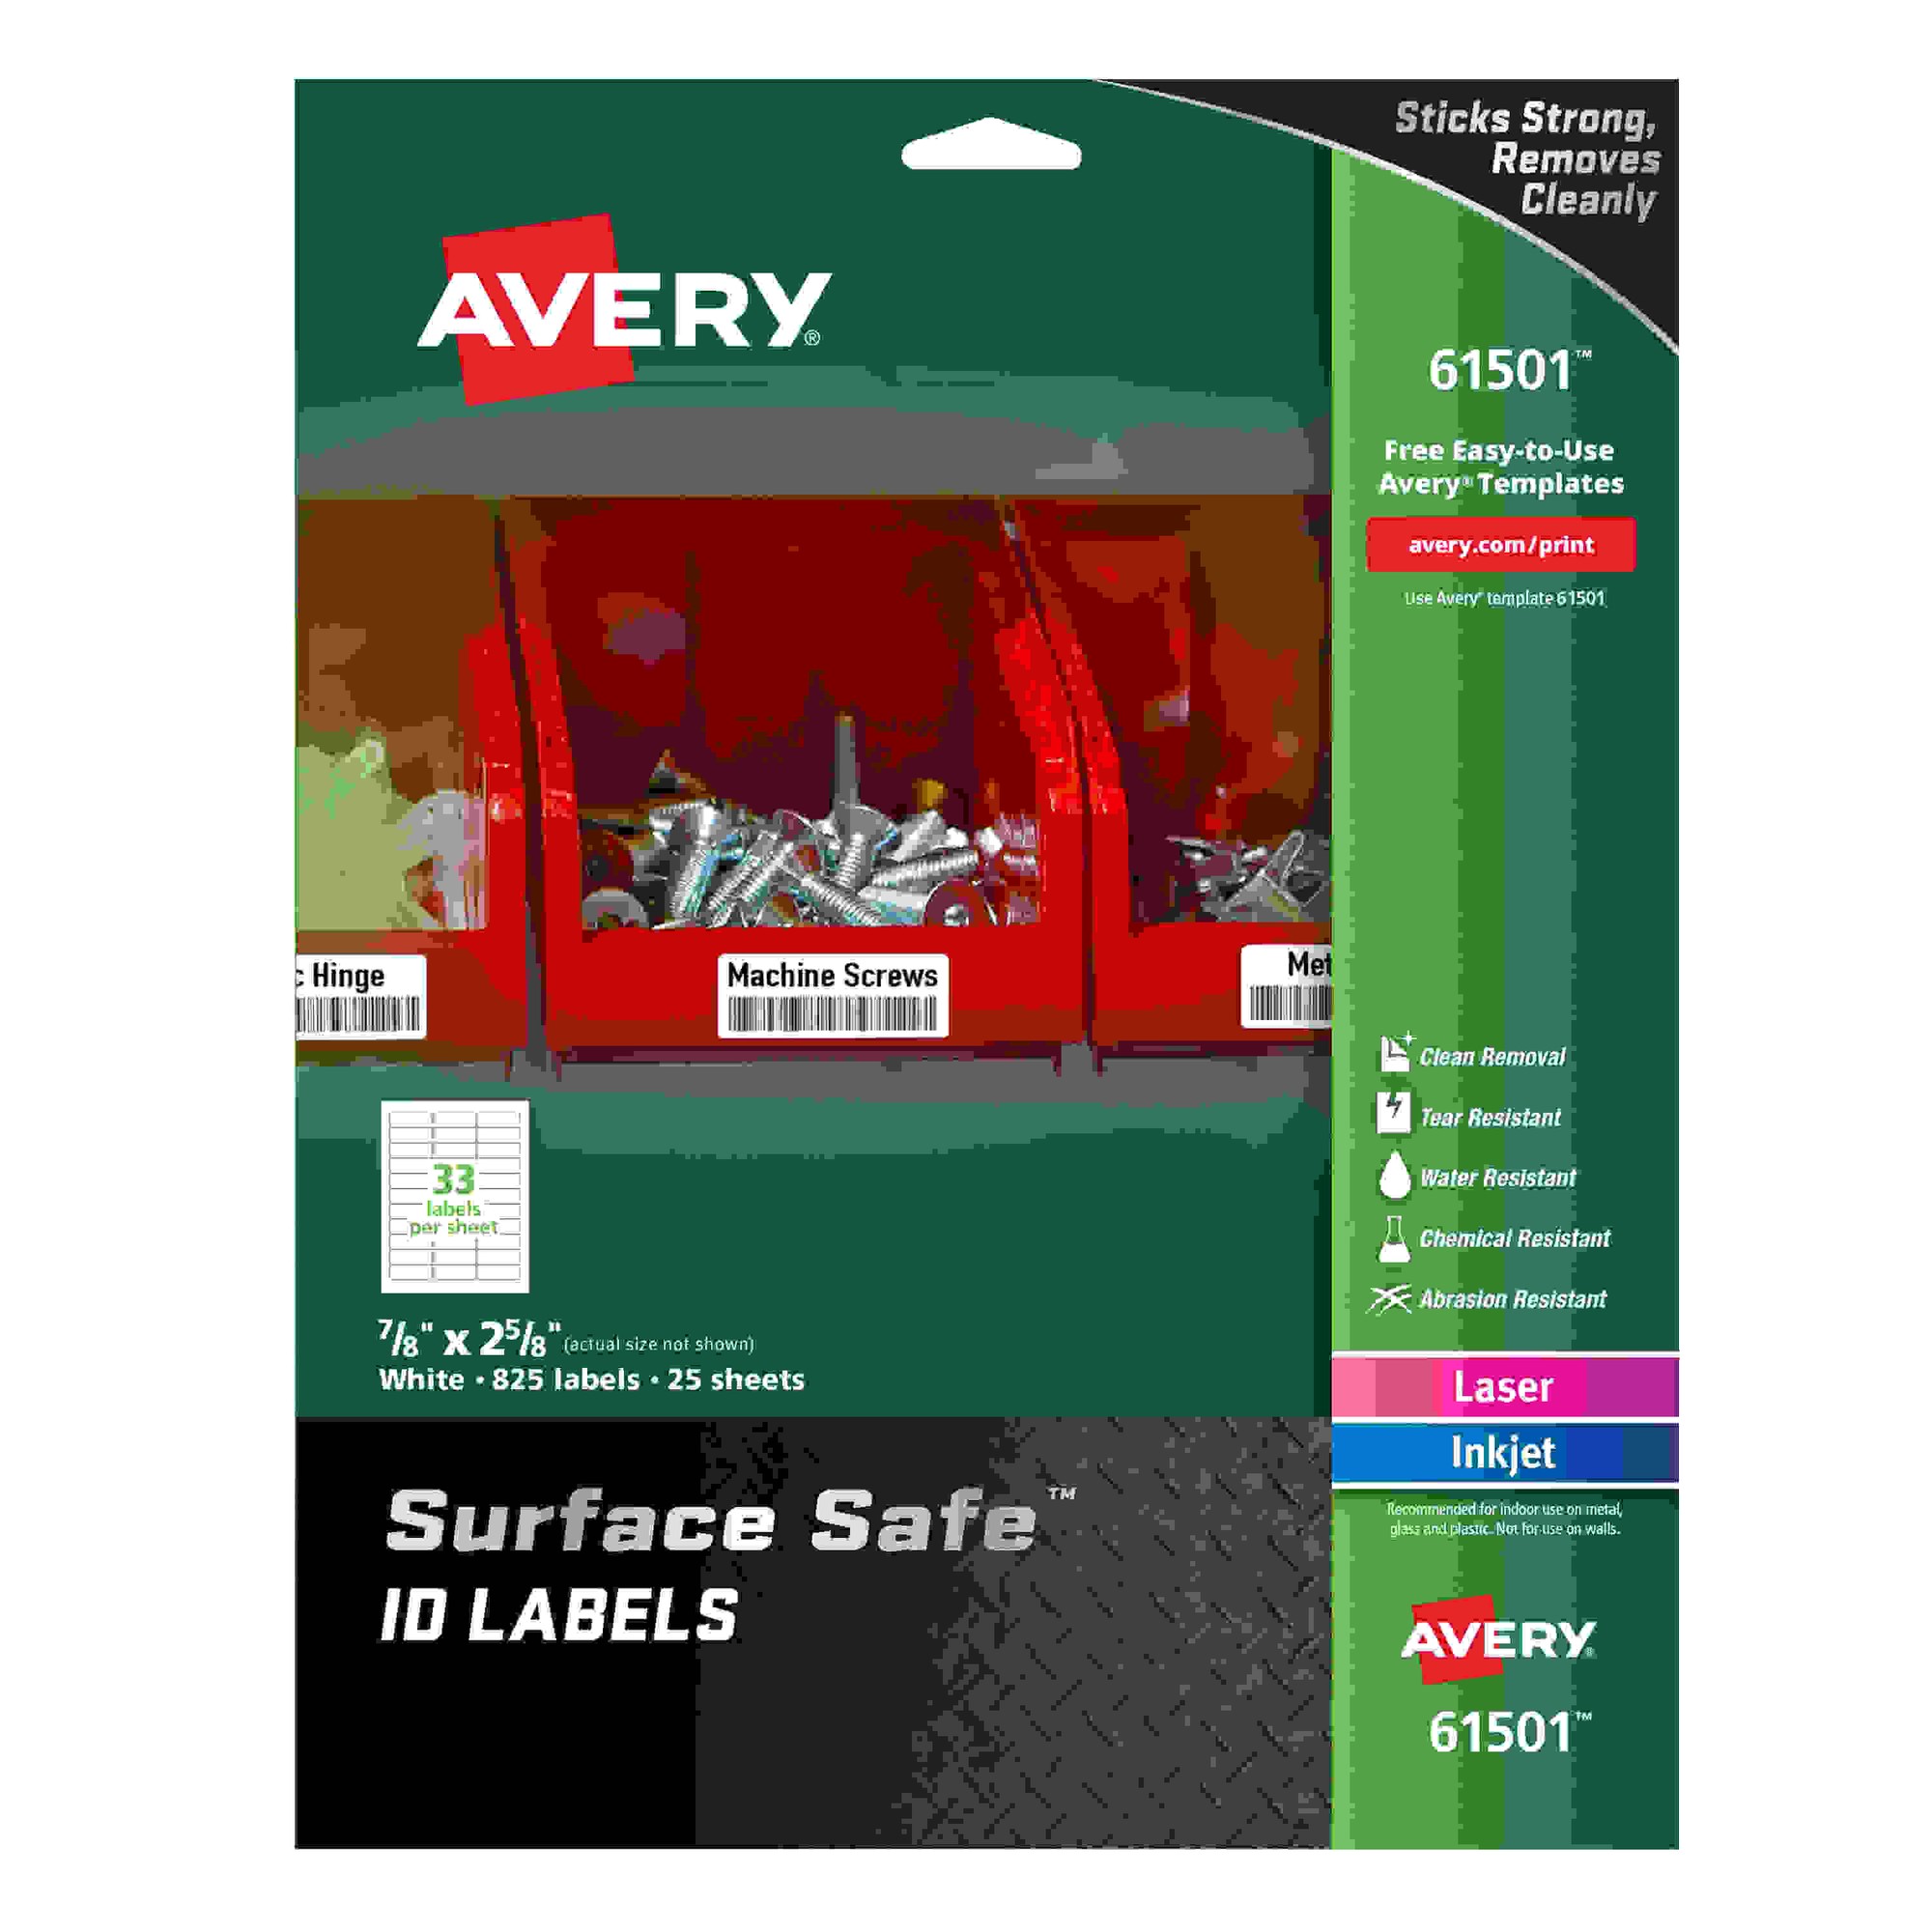 Avery Surface Safe ID Label - 7/8" Width x 2 5/8" Length - Removable Adhesive - Rectangle - Laser, Inkjet - White - Film - 